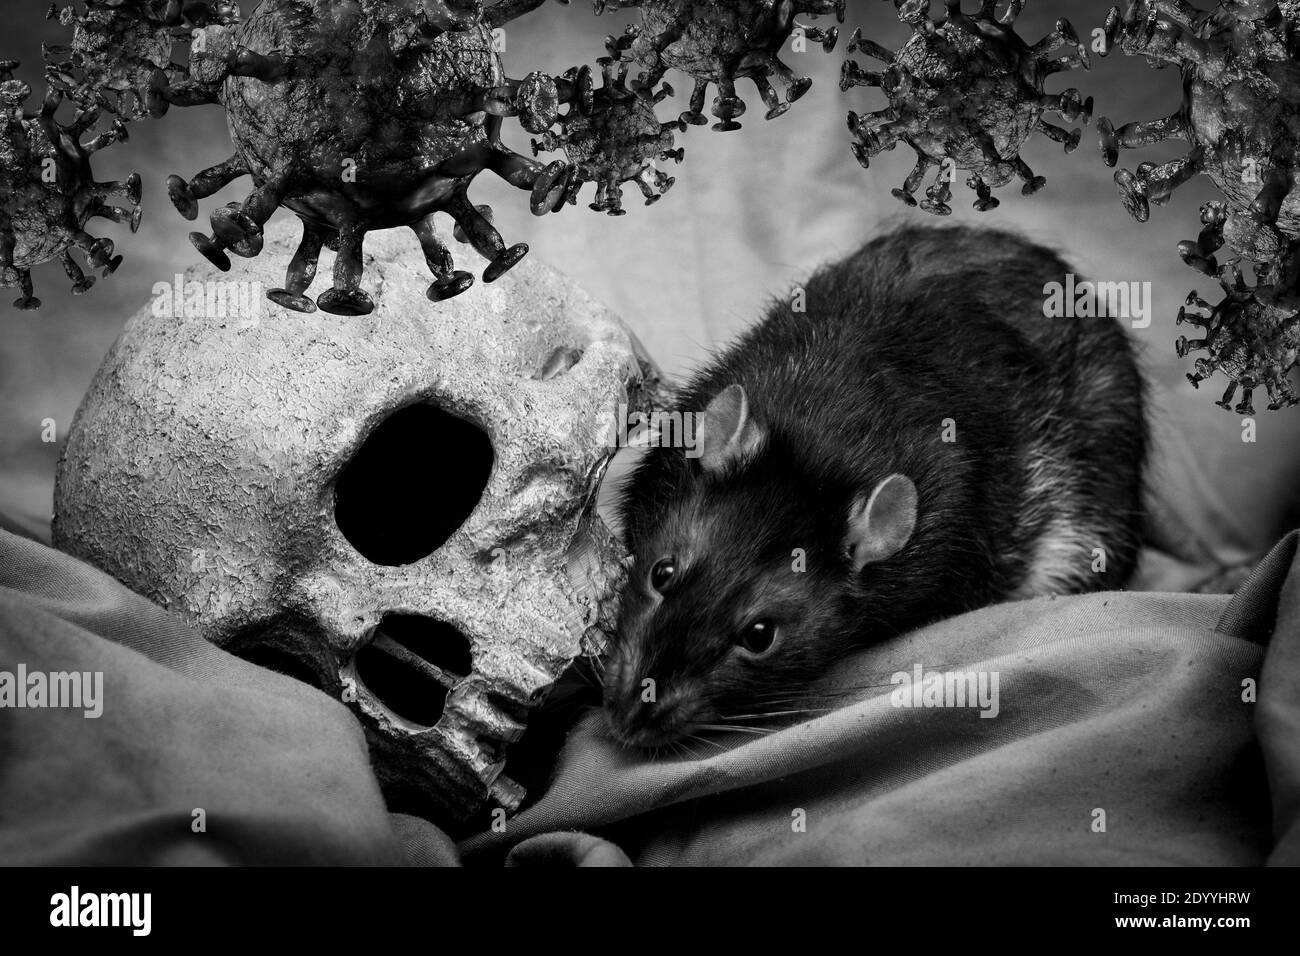 Rat plays with human skull surrounded by coronavirus infection concept Stock Photo